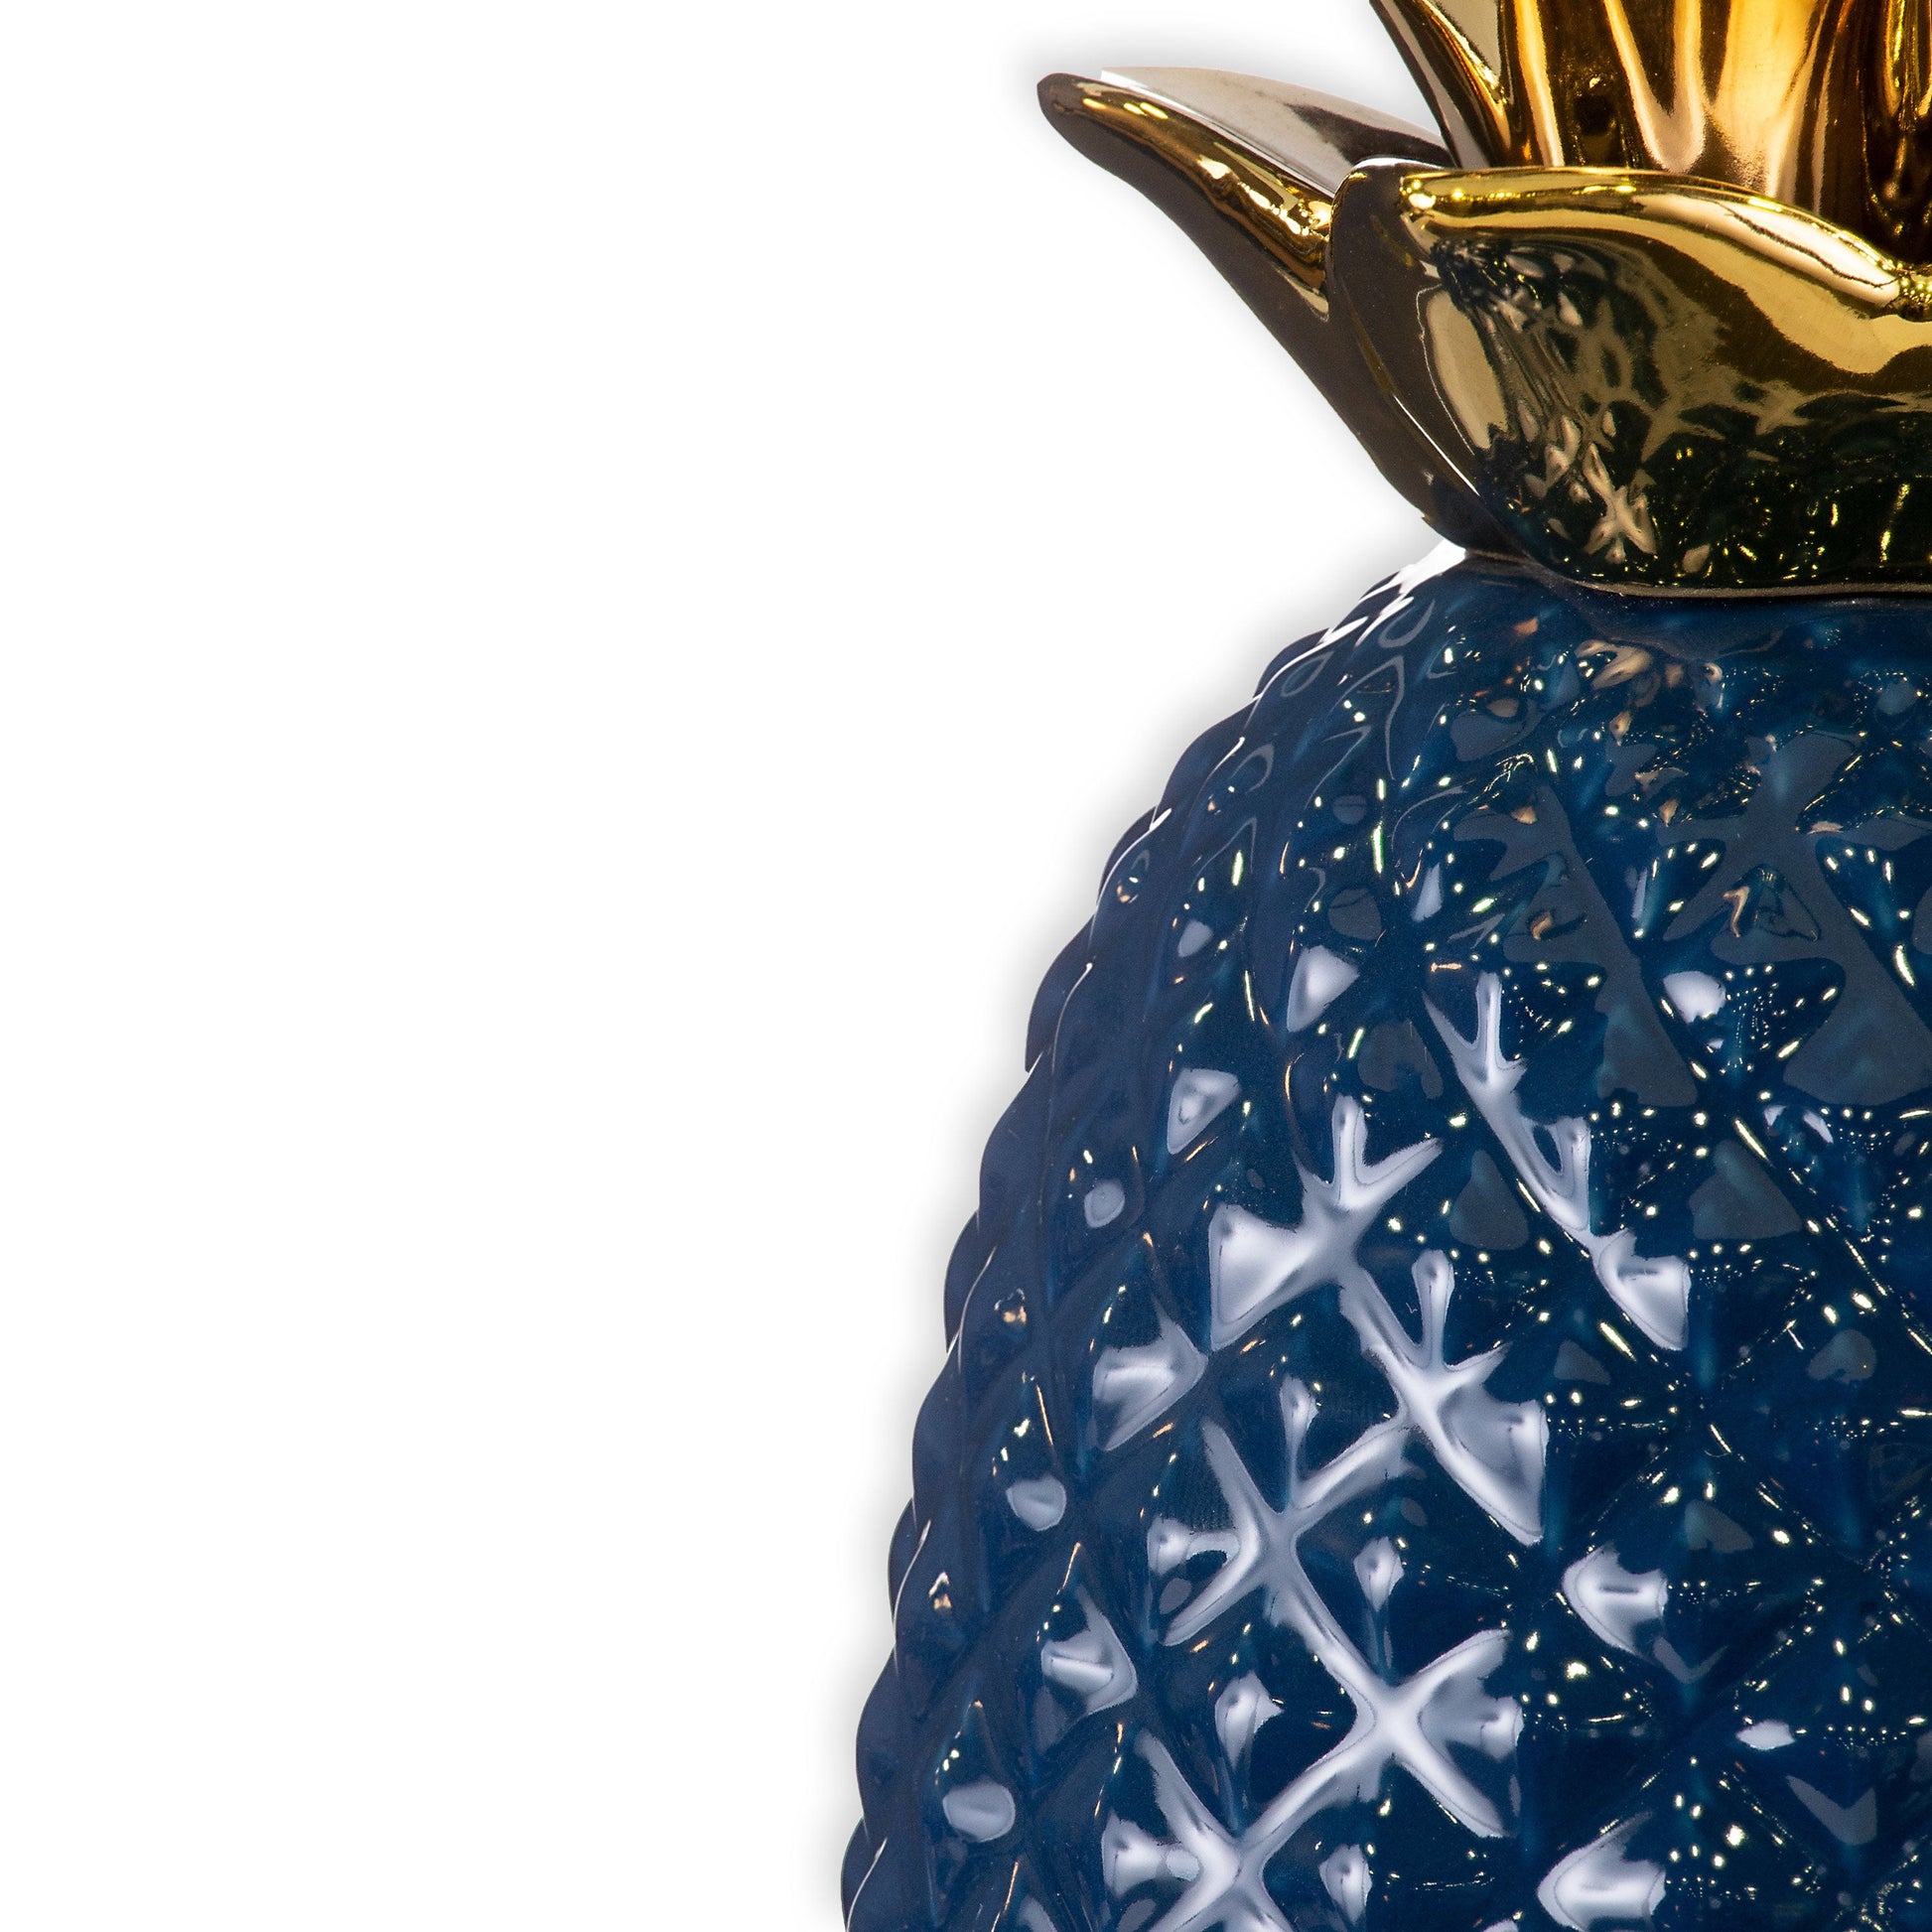 Pier 1 Pineapple Navy And Gold Table Lamp - The Home Resolution